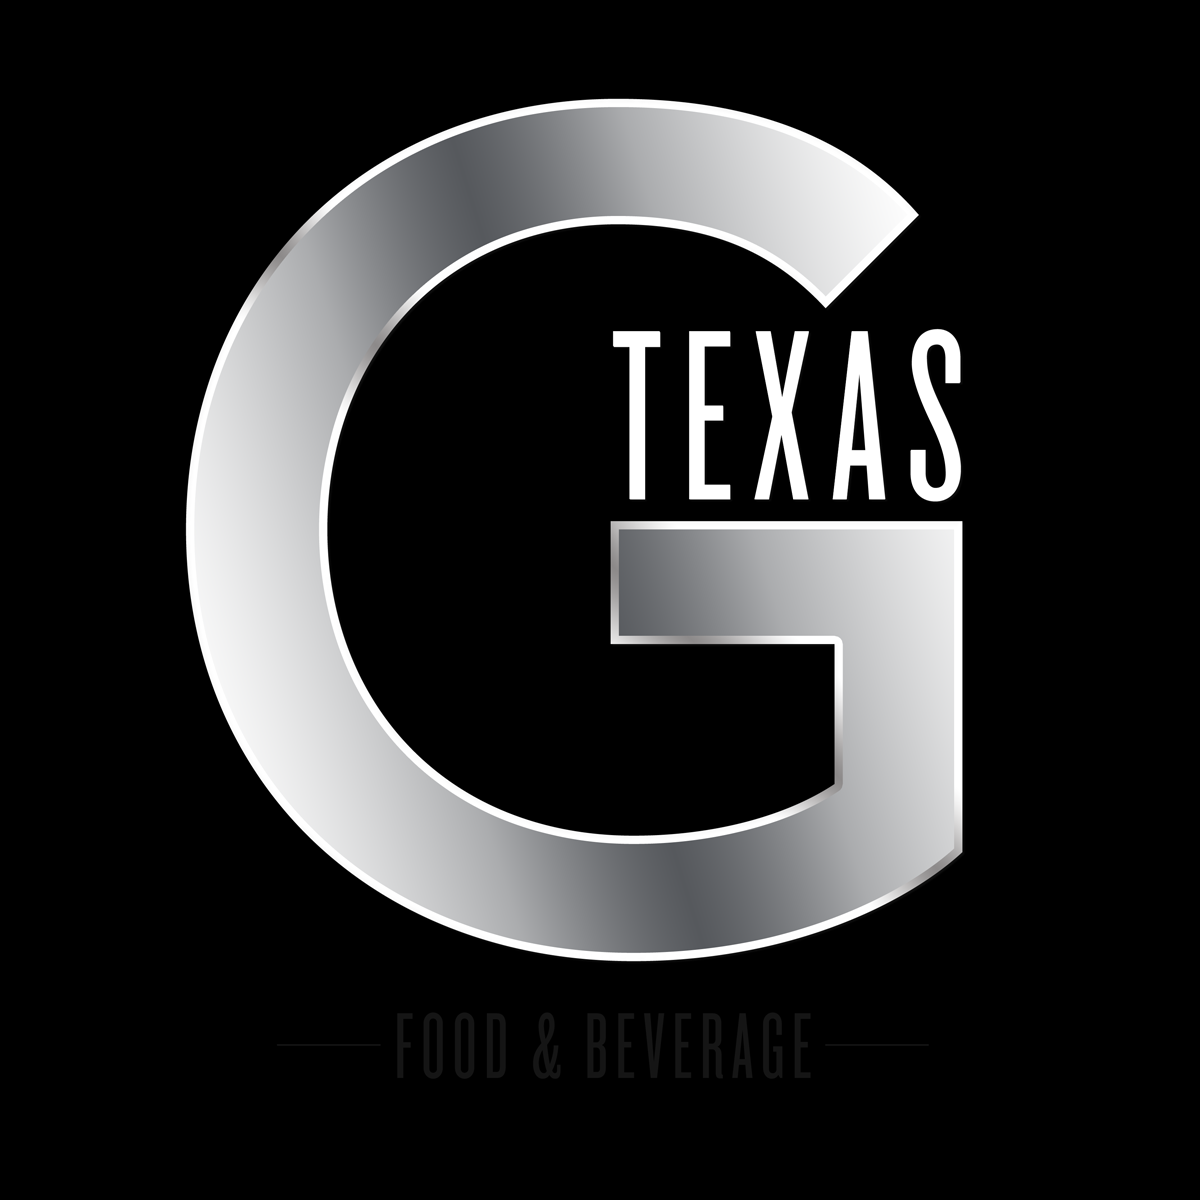 Full-service catering and event company providing upscale cuisines and bar services to the Dallas, Fort Worth area.